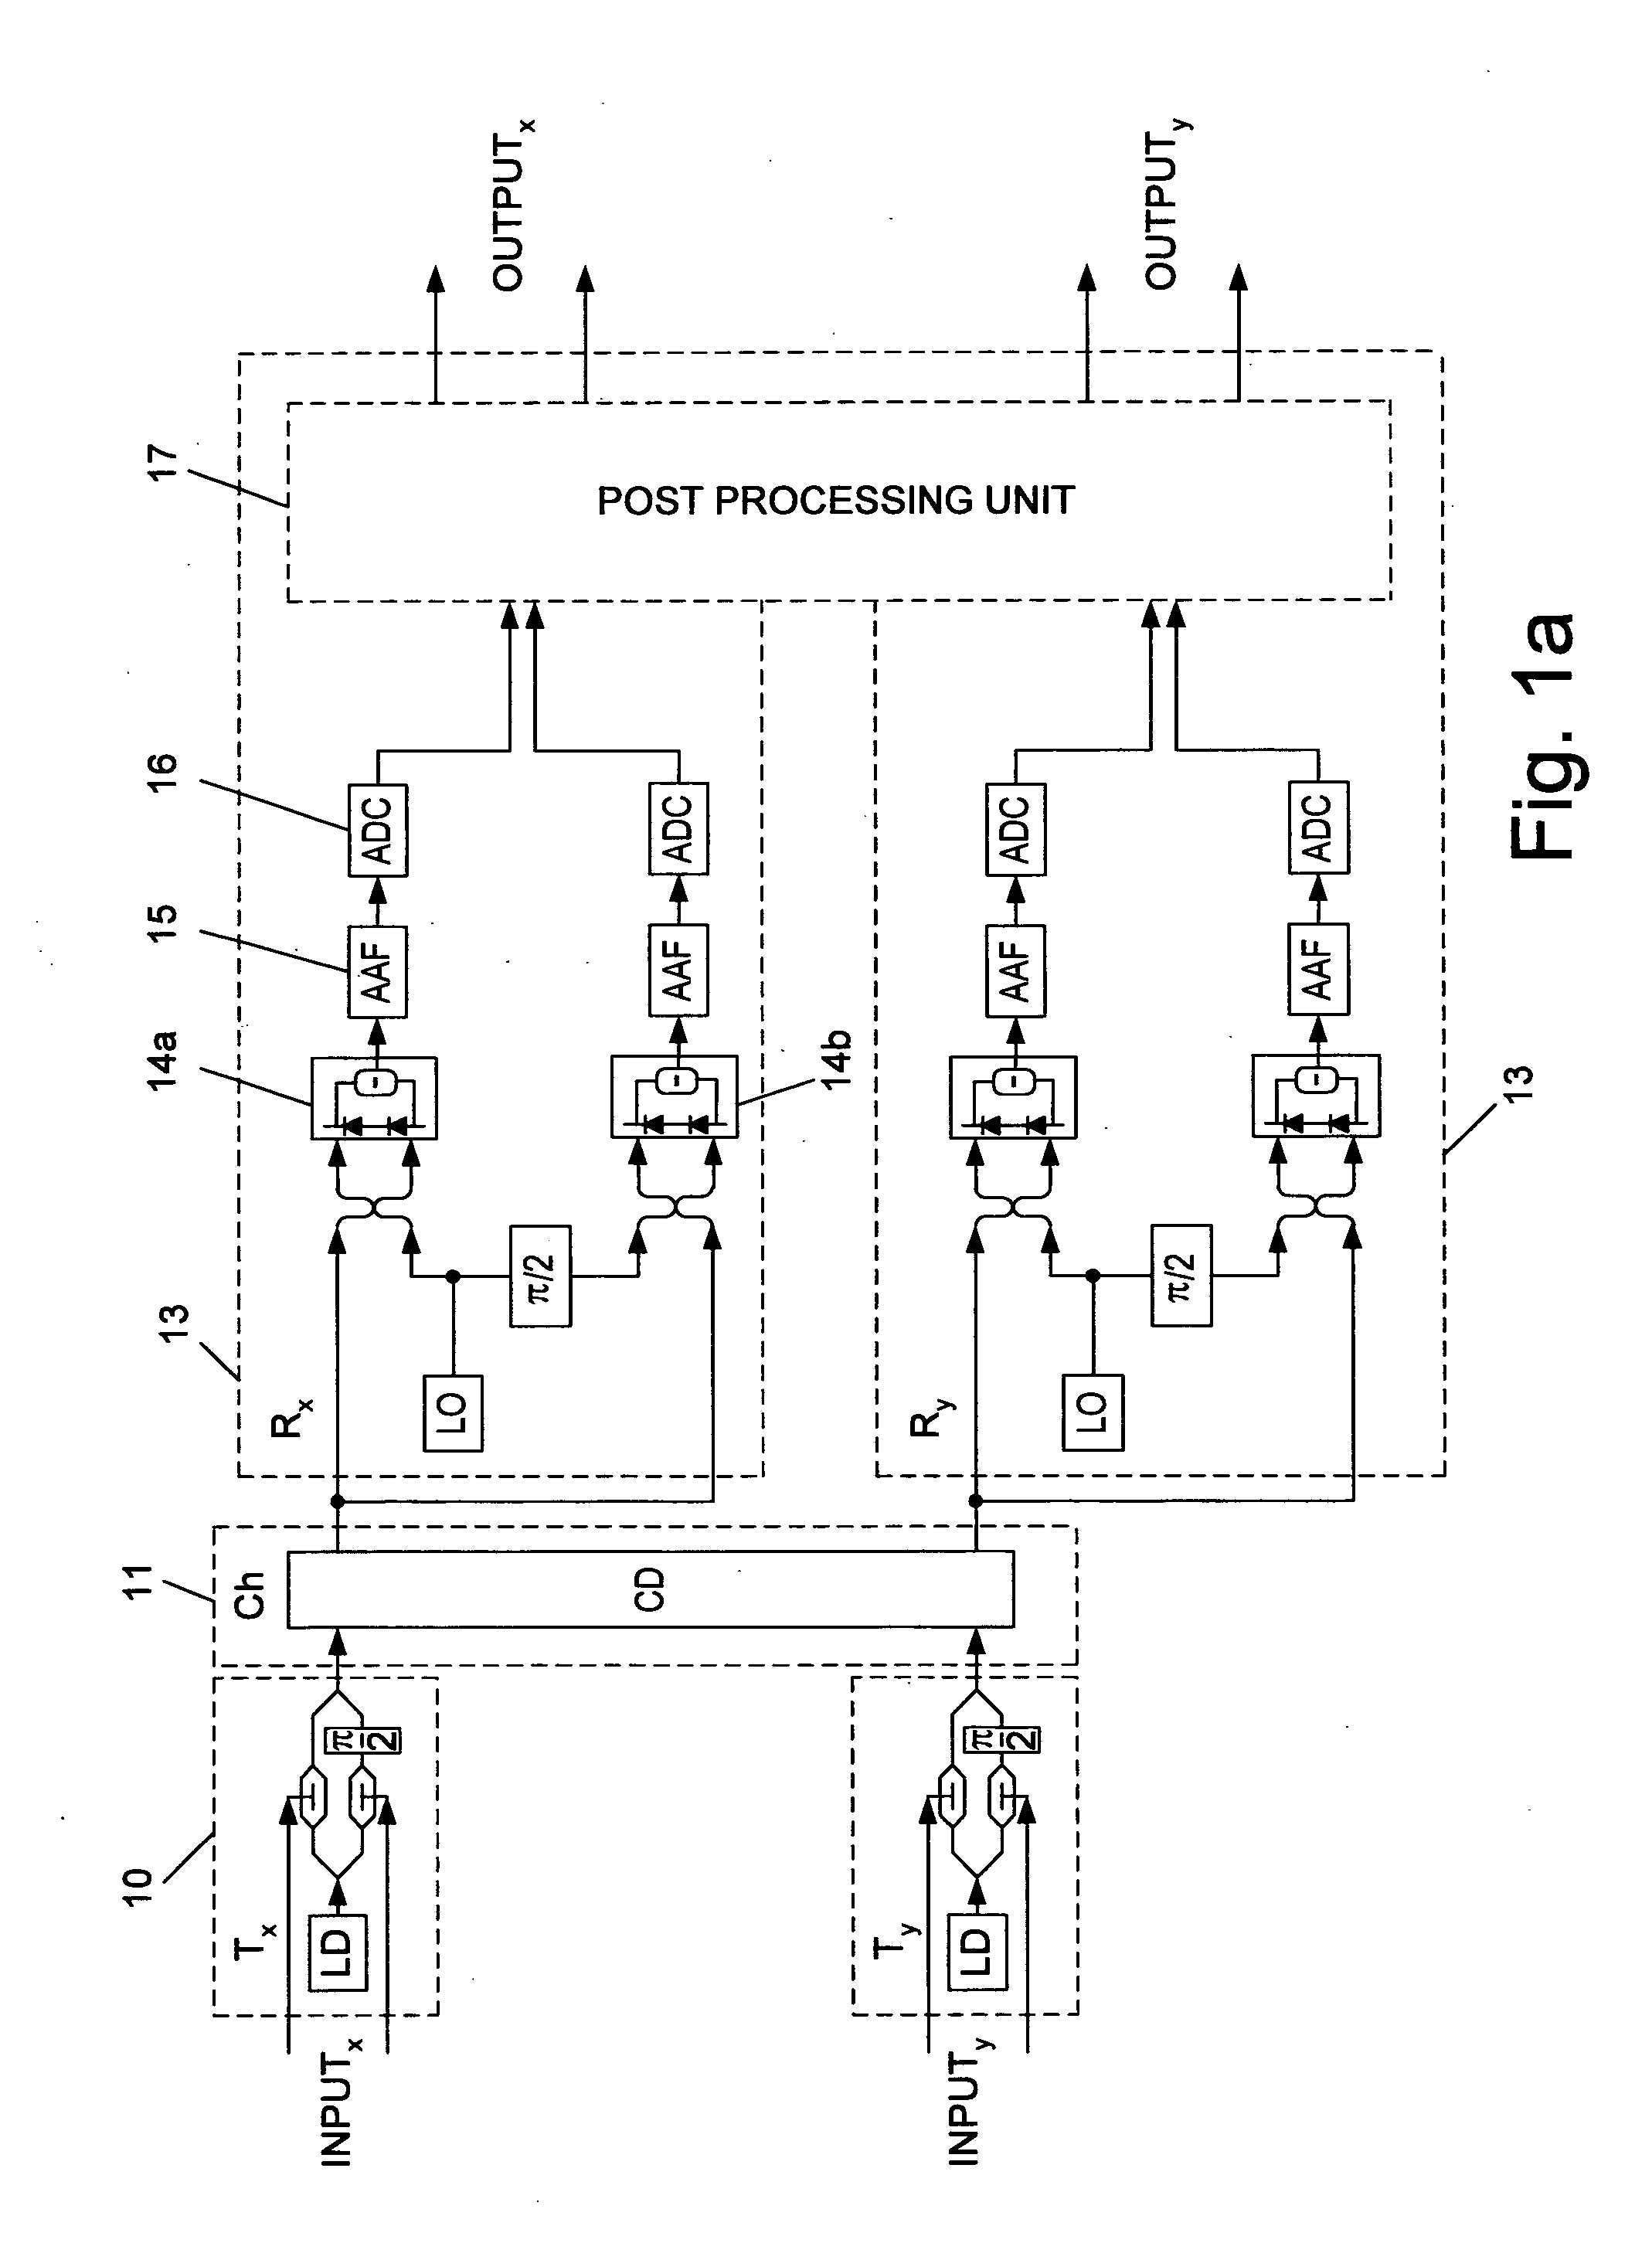 Method and system for coherent equalization of chromatic dispersion of optical signals in a fiber